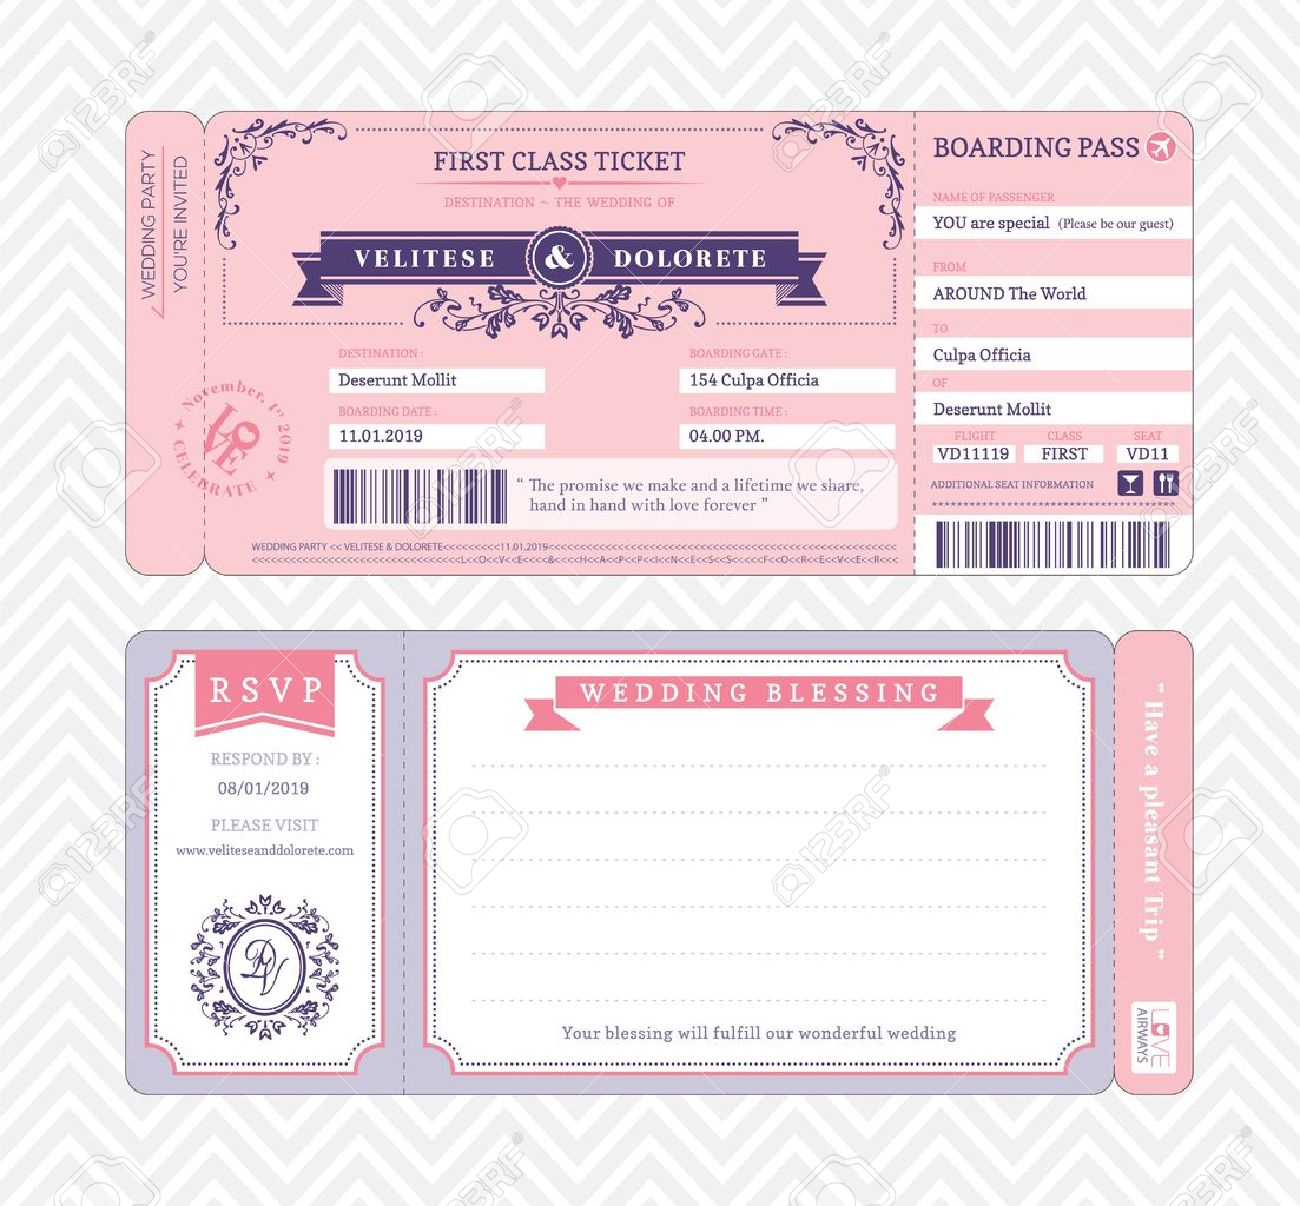 Boarding Pass Ticket Wedding Invitation Template Royalty Free with dimensions 1300 X 1206